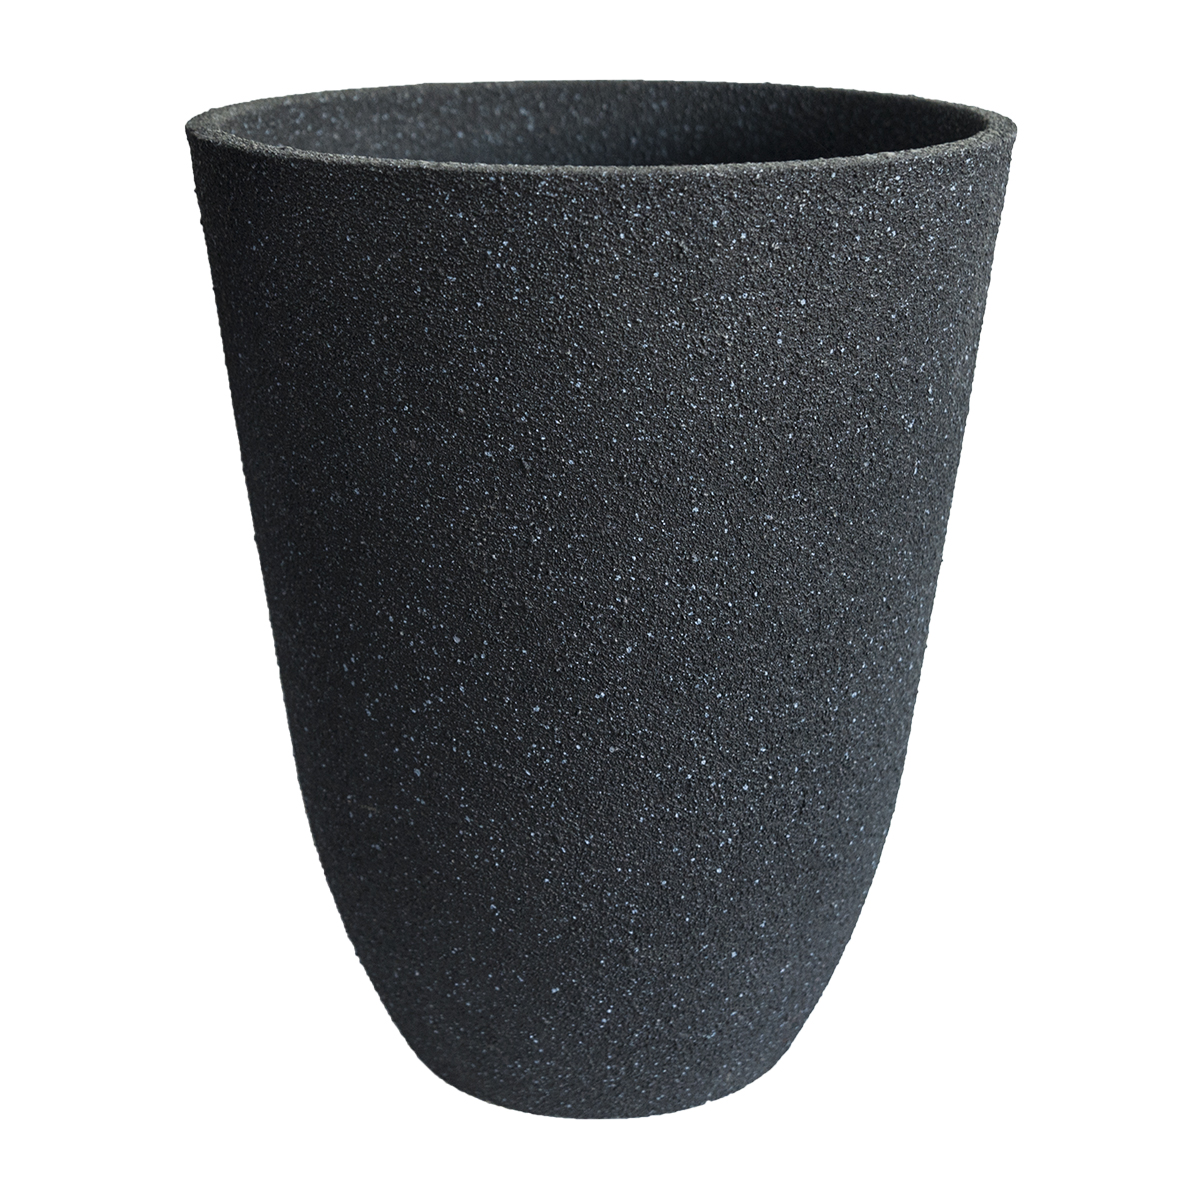 Tall Cement Effect Lightweight Recycled Plastic Planter